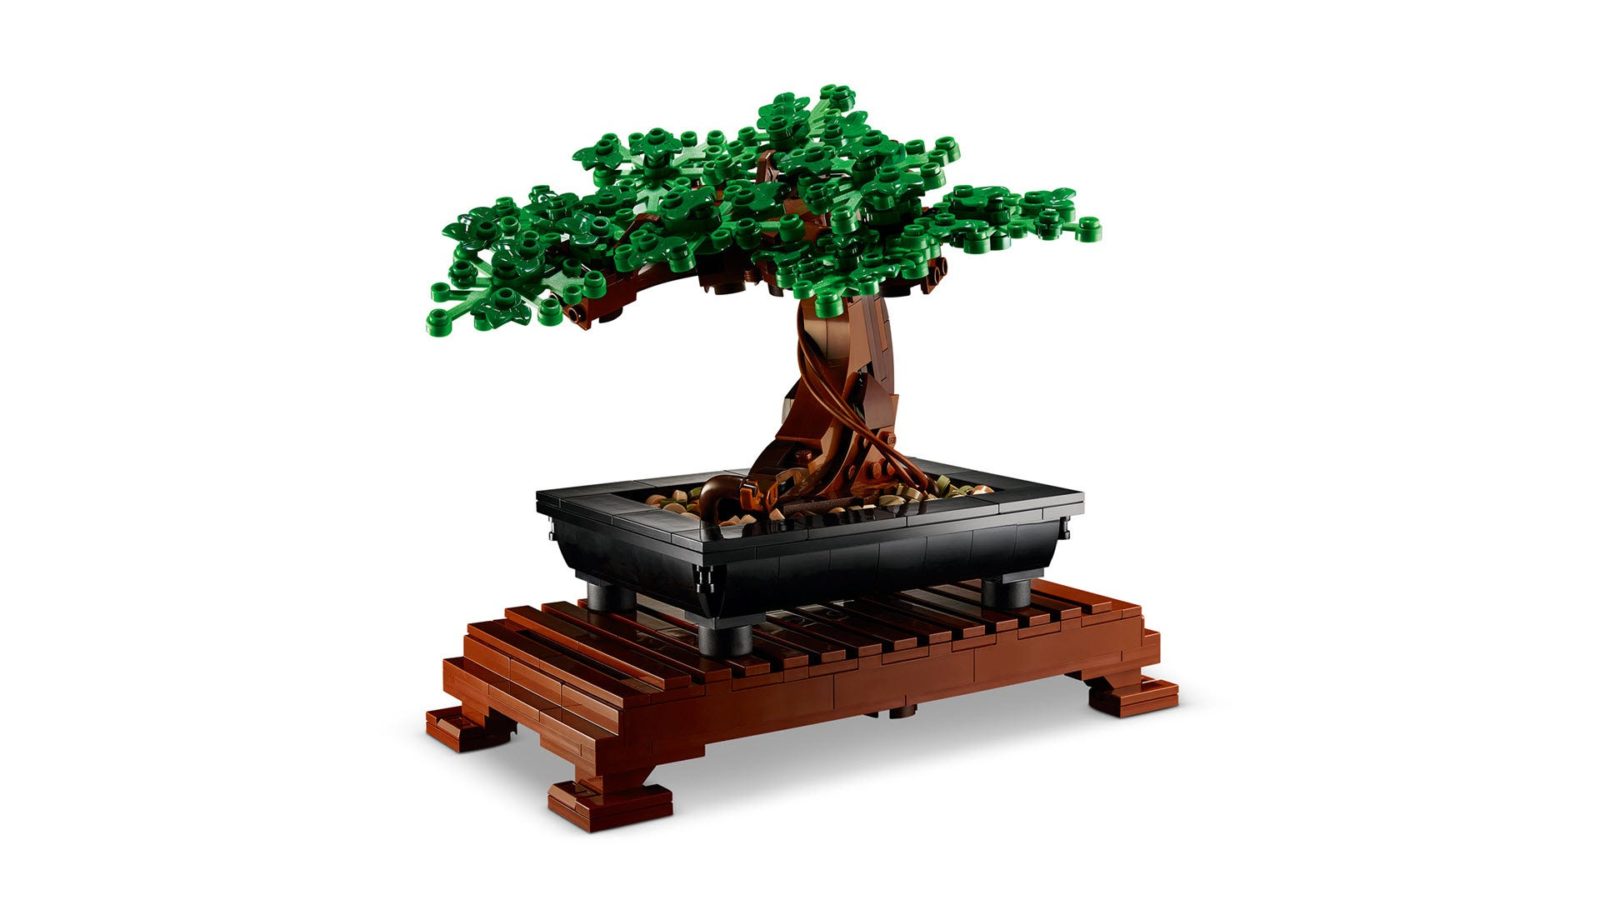 Elements From LEGO's Bonsai Tree Kit Are Made of Sugarcane